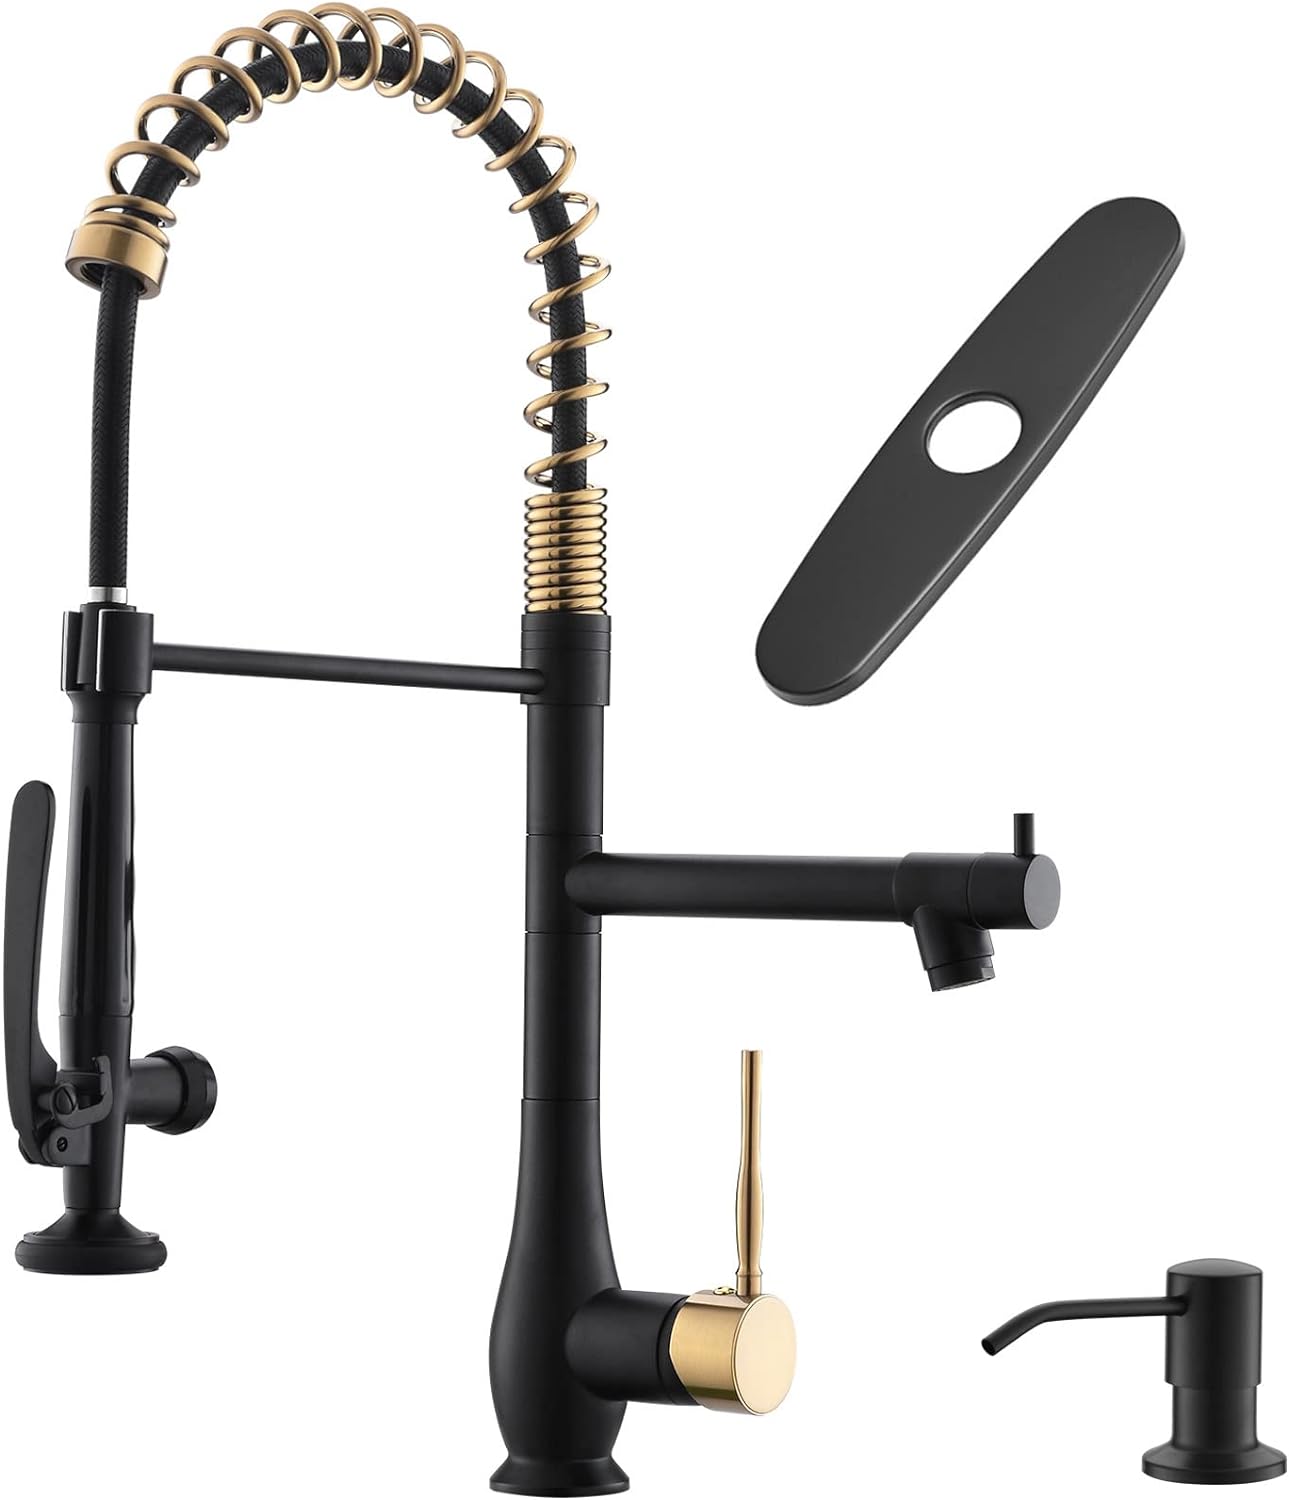 GIMILI Commercial Kitchen Faucet with Pull Down Sprayer, Double Headed Single Handle High Pressure Kitchen with Soap Dispenser Matte Black&Gold